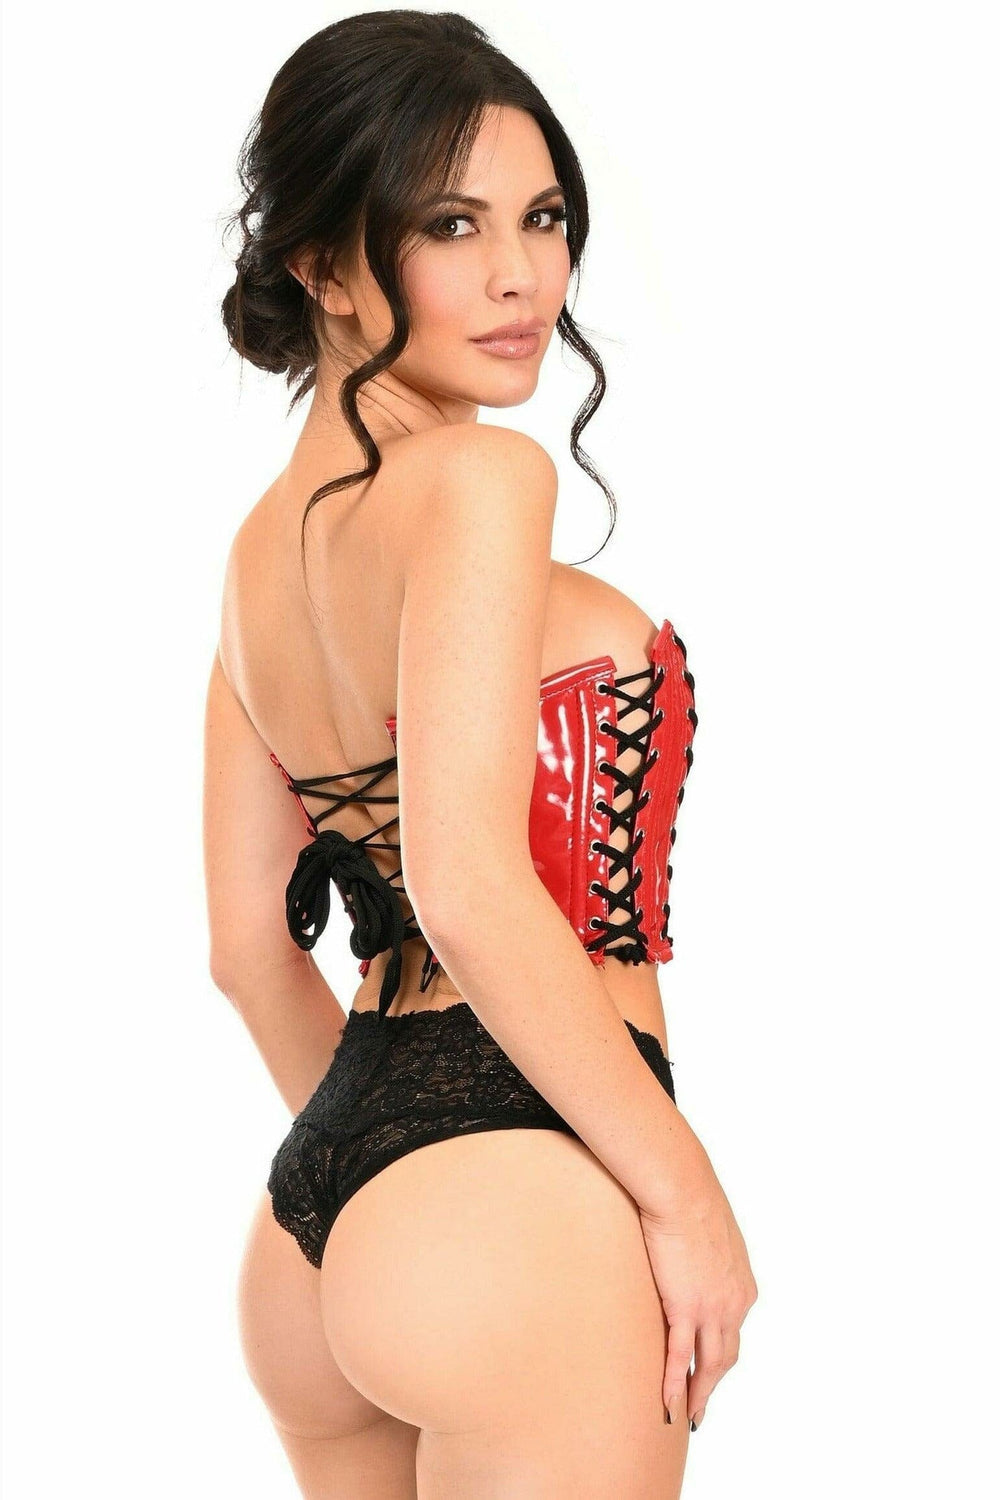 Lavish Red Patent w/Black Lacing Lace-Up Bustier-Bustier Corsets-Daisy Corsets-SEXYSHOES.COM